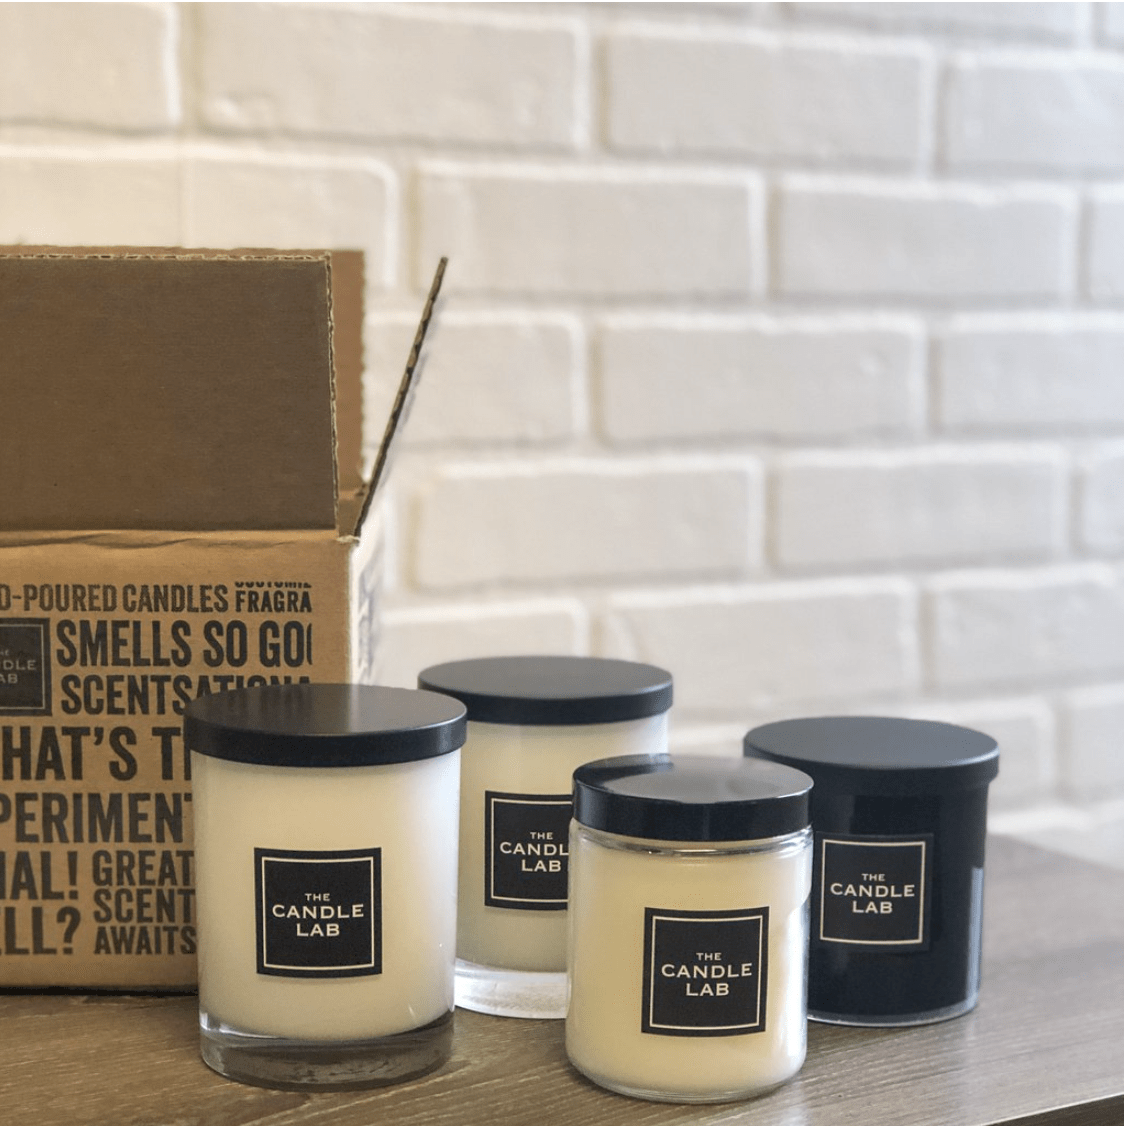 The Candle Lab Mystery Box – On Sale Now